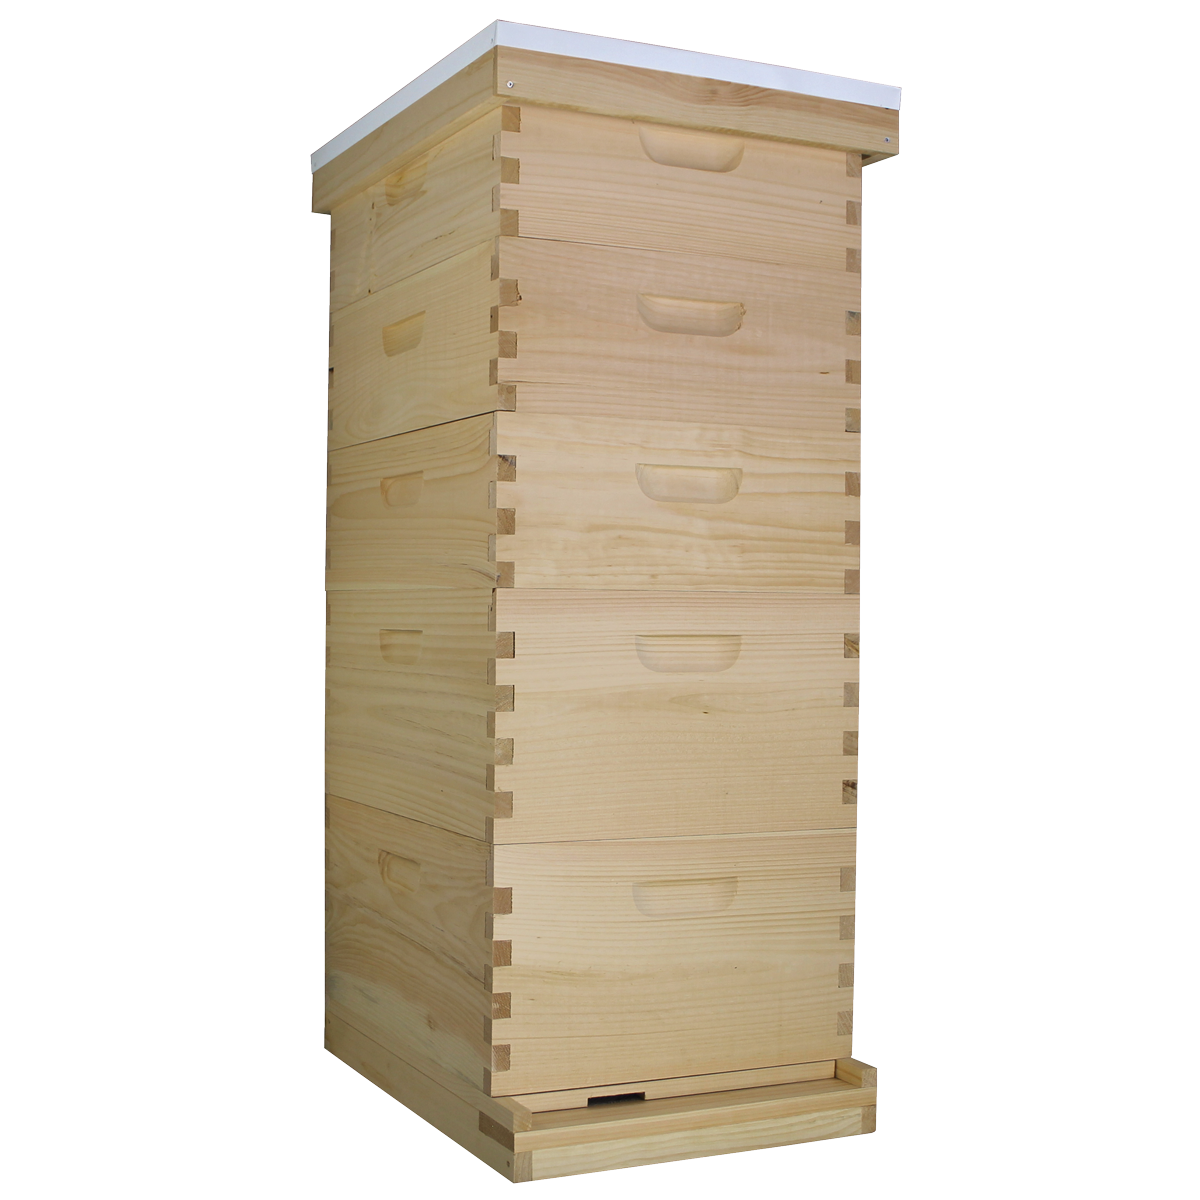 2 Deep and 1 Medium Langstroth Beehive 10 Wooden Frame Box Kit with Waxed Boxes 